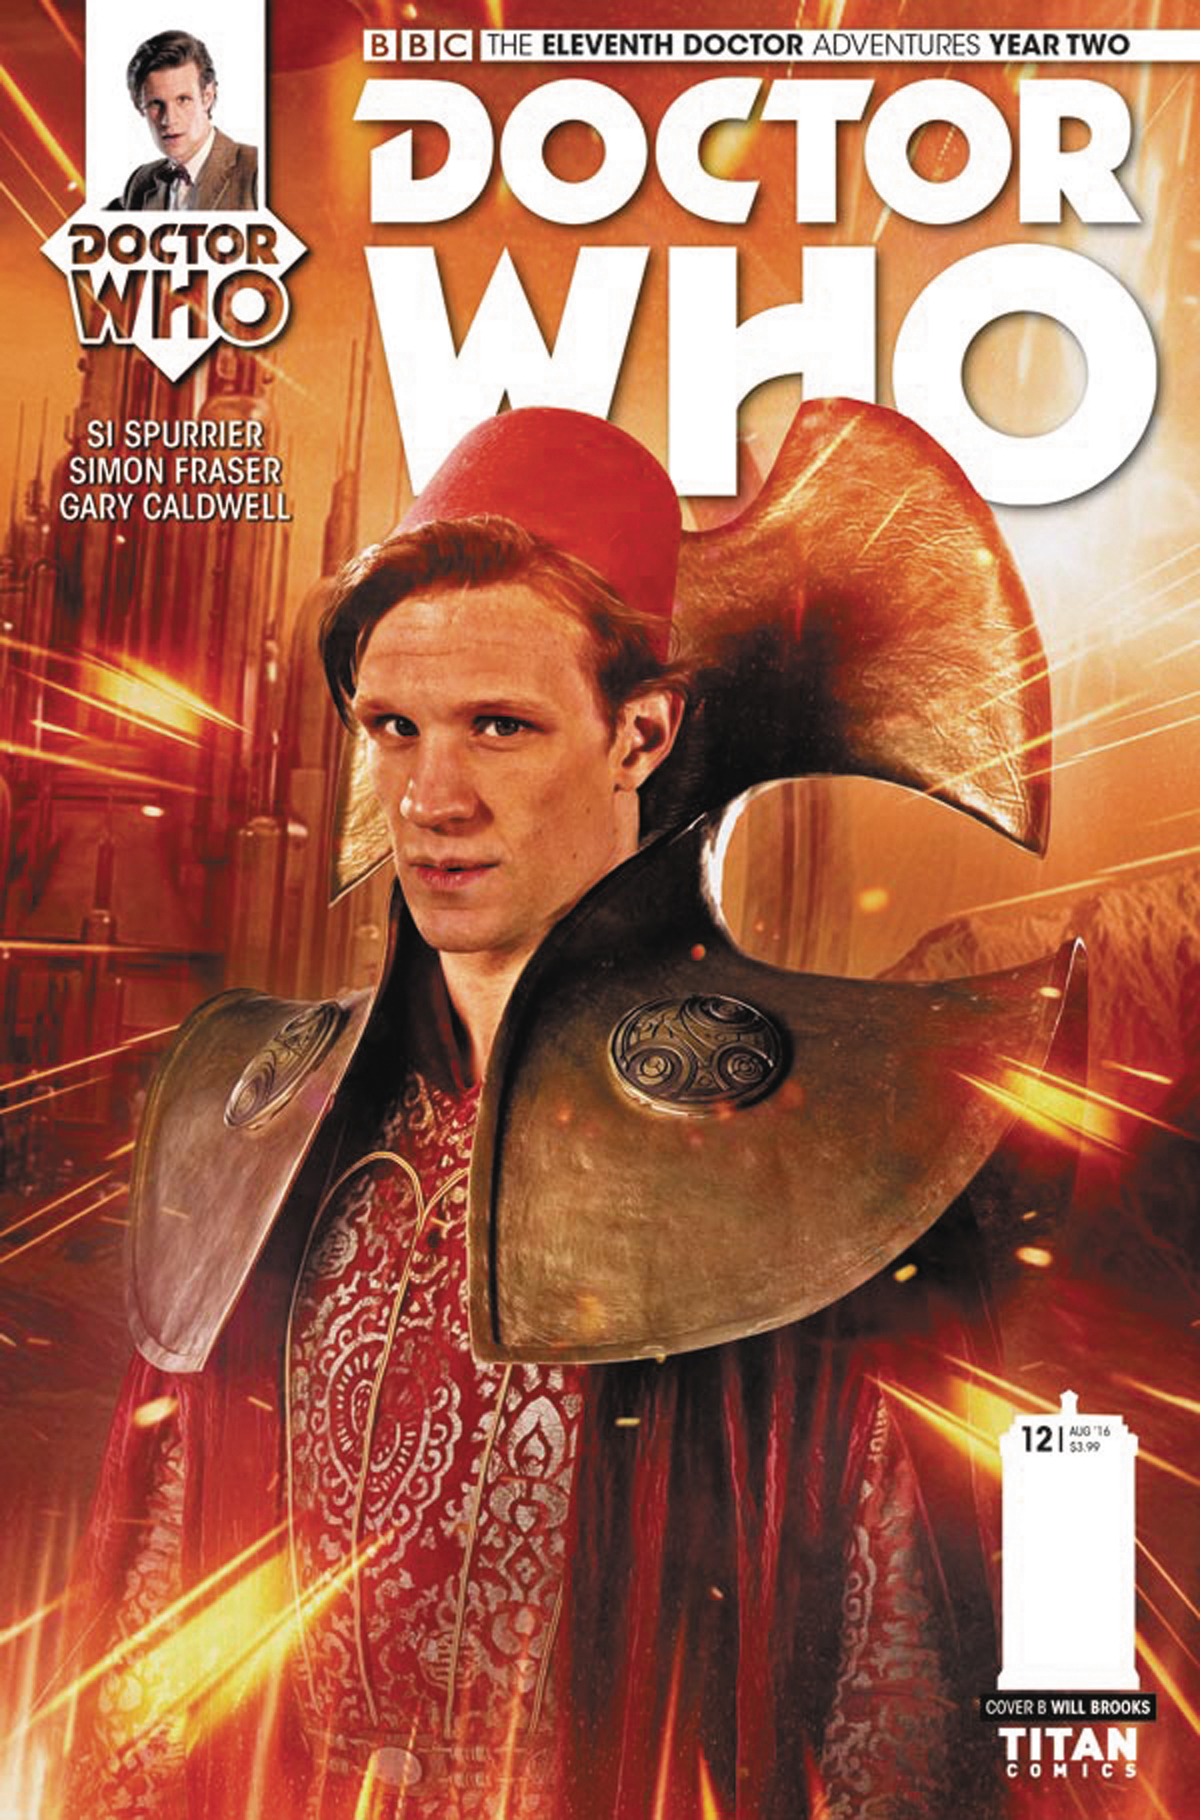 DOCTOR WHO 11TH YEAR TWO #12 CVR B PHOTO